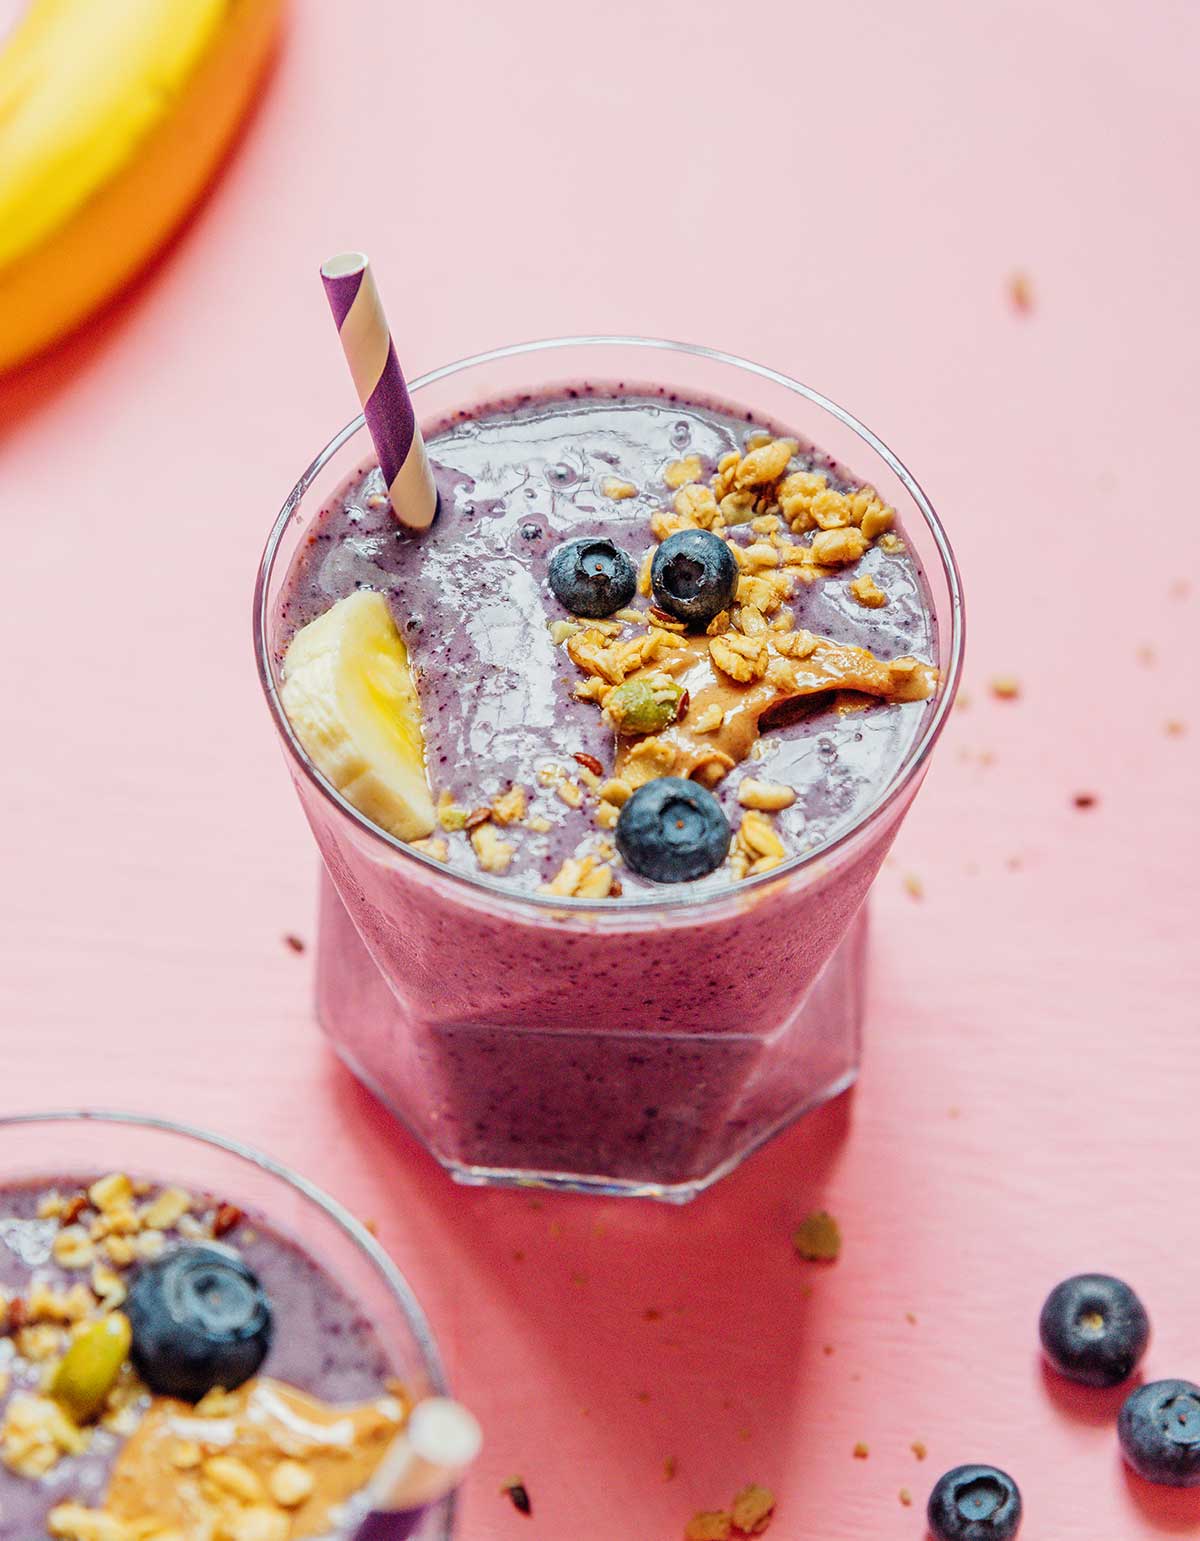 A glass filled with blueberry banana smoothie and topped with nut butter, granola, blueberries, and a banana slice